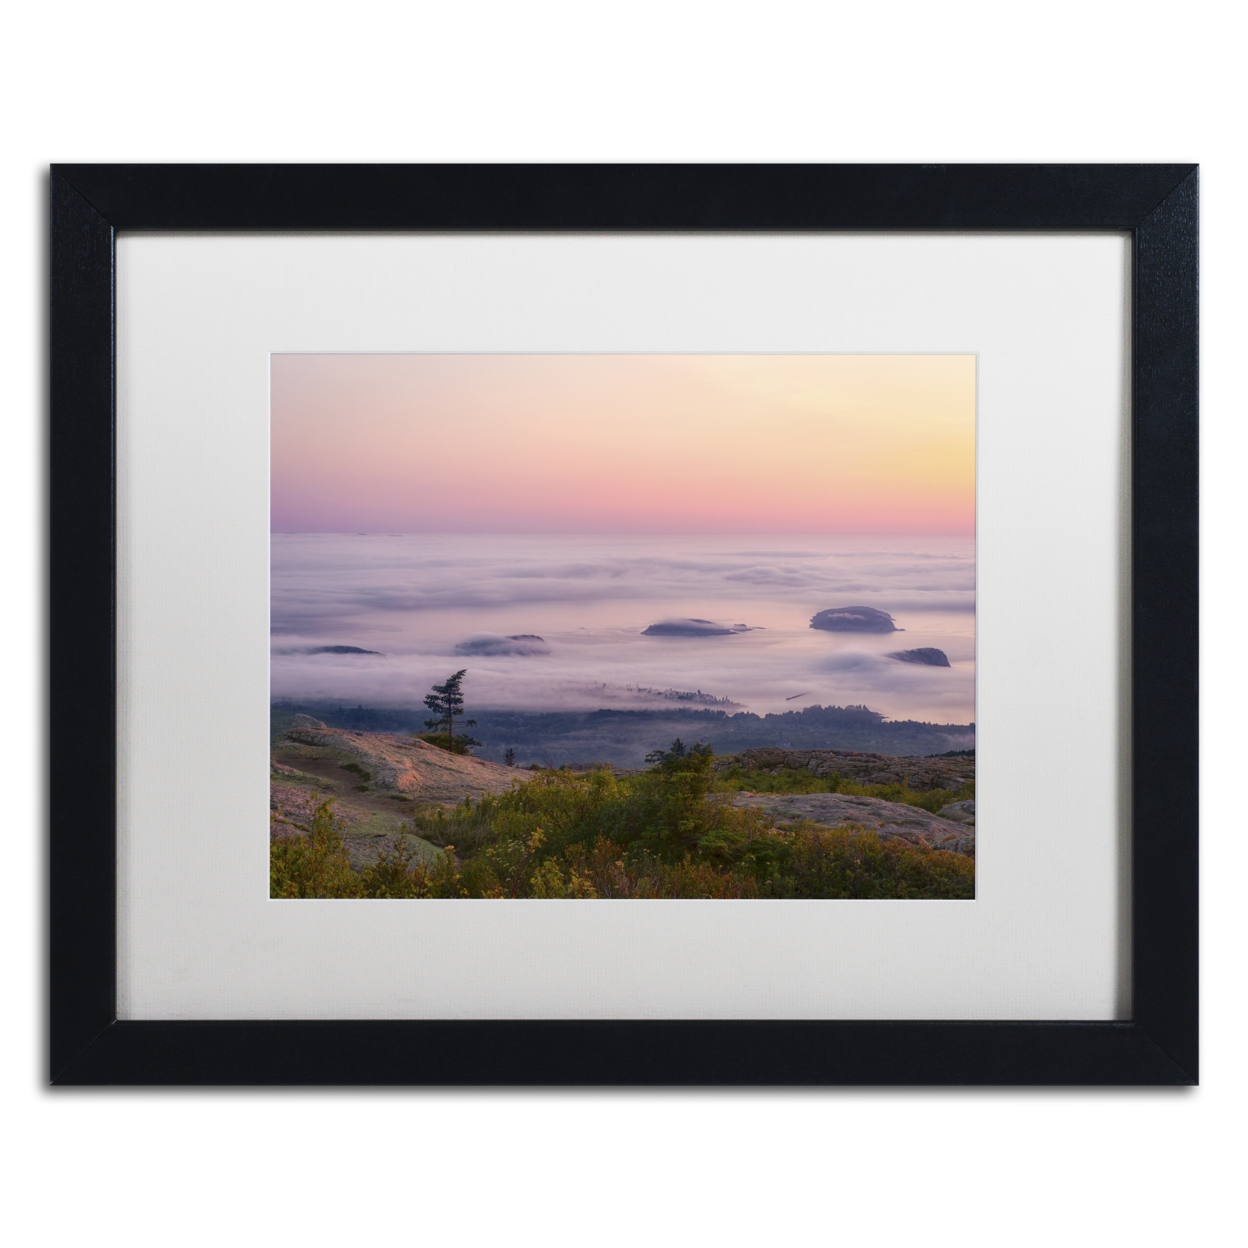 Michael Blanchette Photography 'Islands In The Fog' Black Wooden Framed Art 18 X 22 Inches